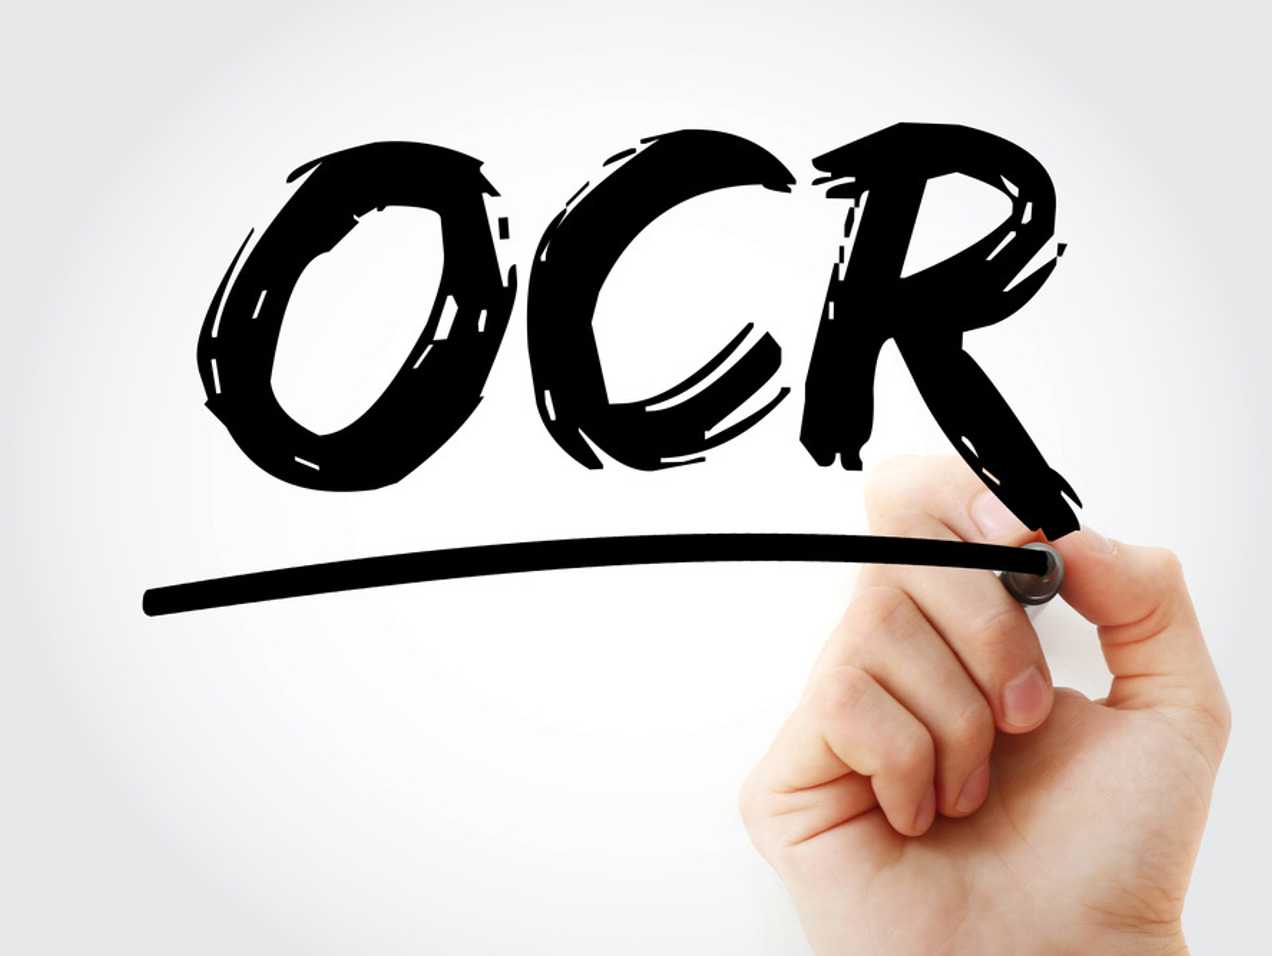 OMG! OCR! There is No Need to Panic